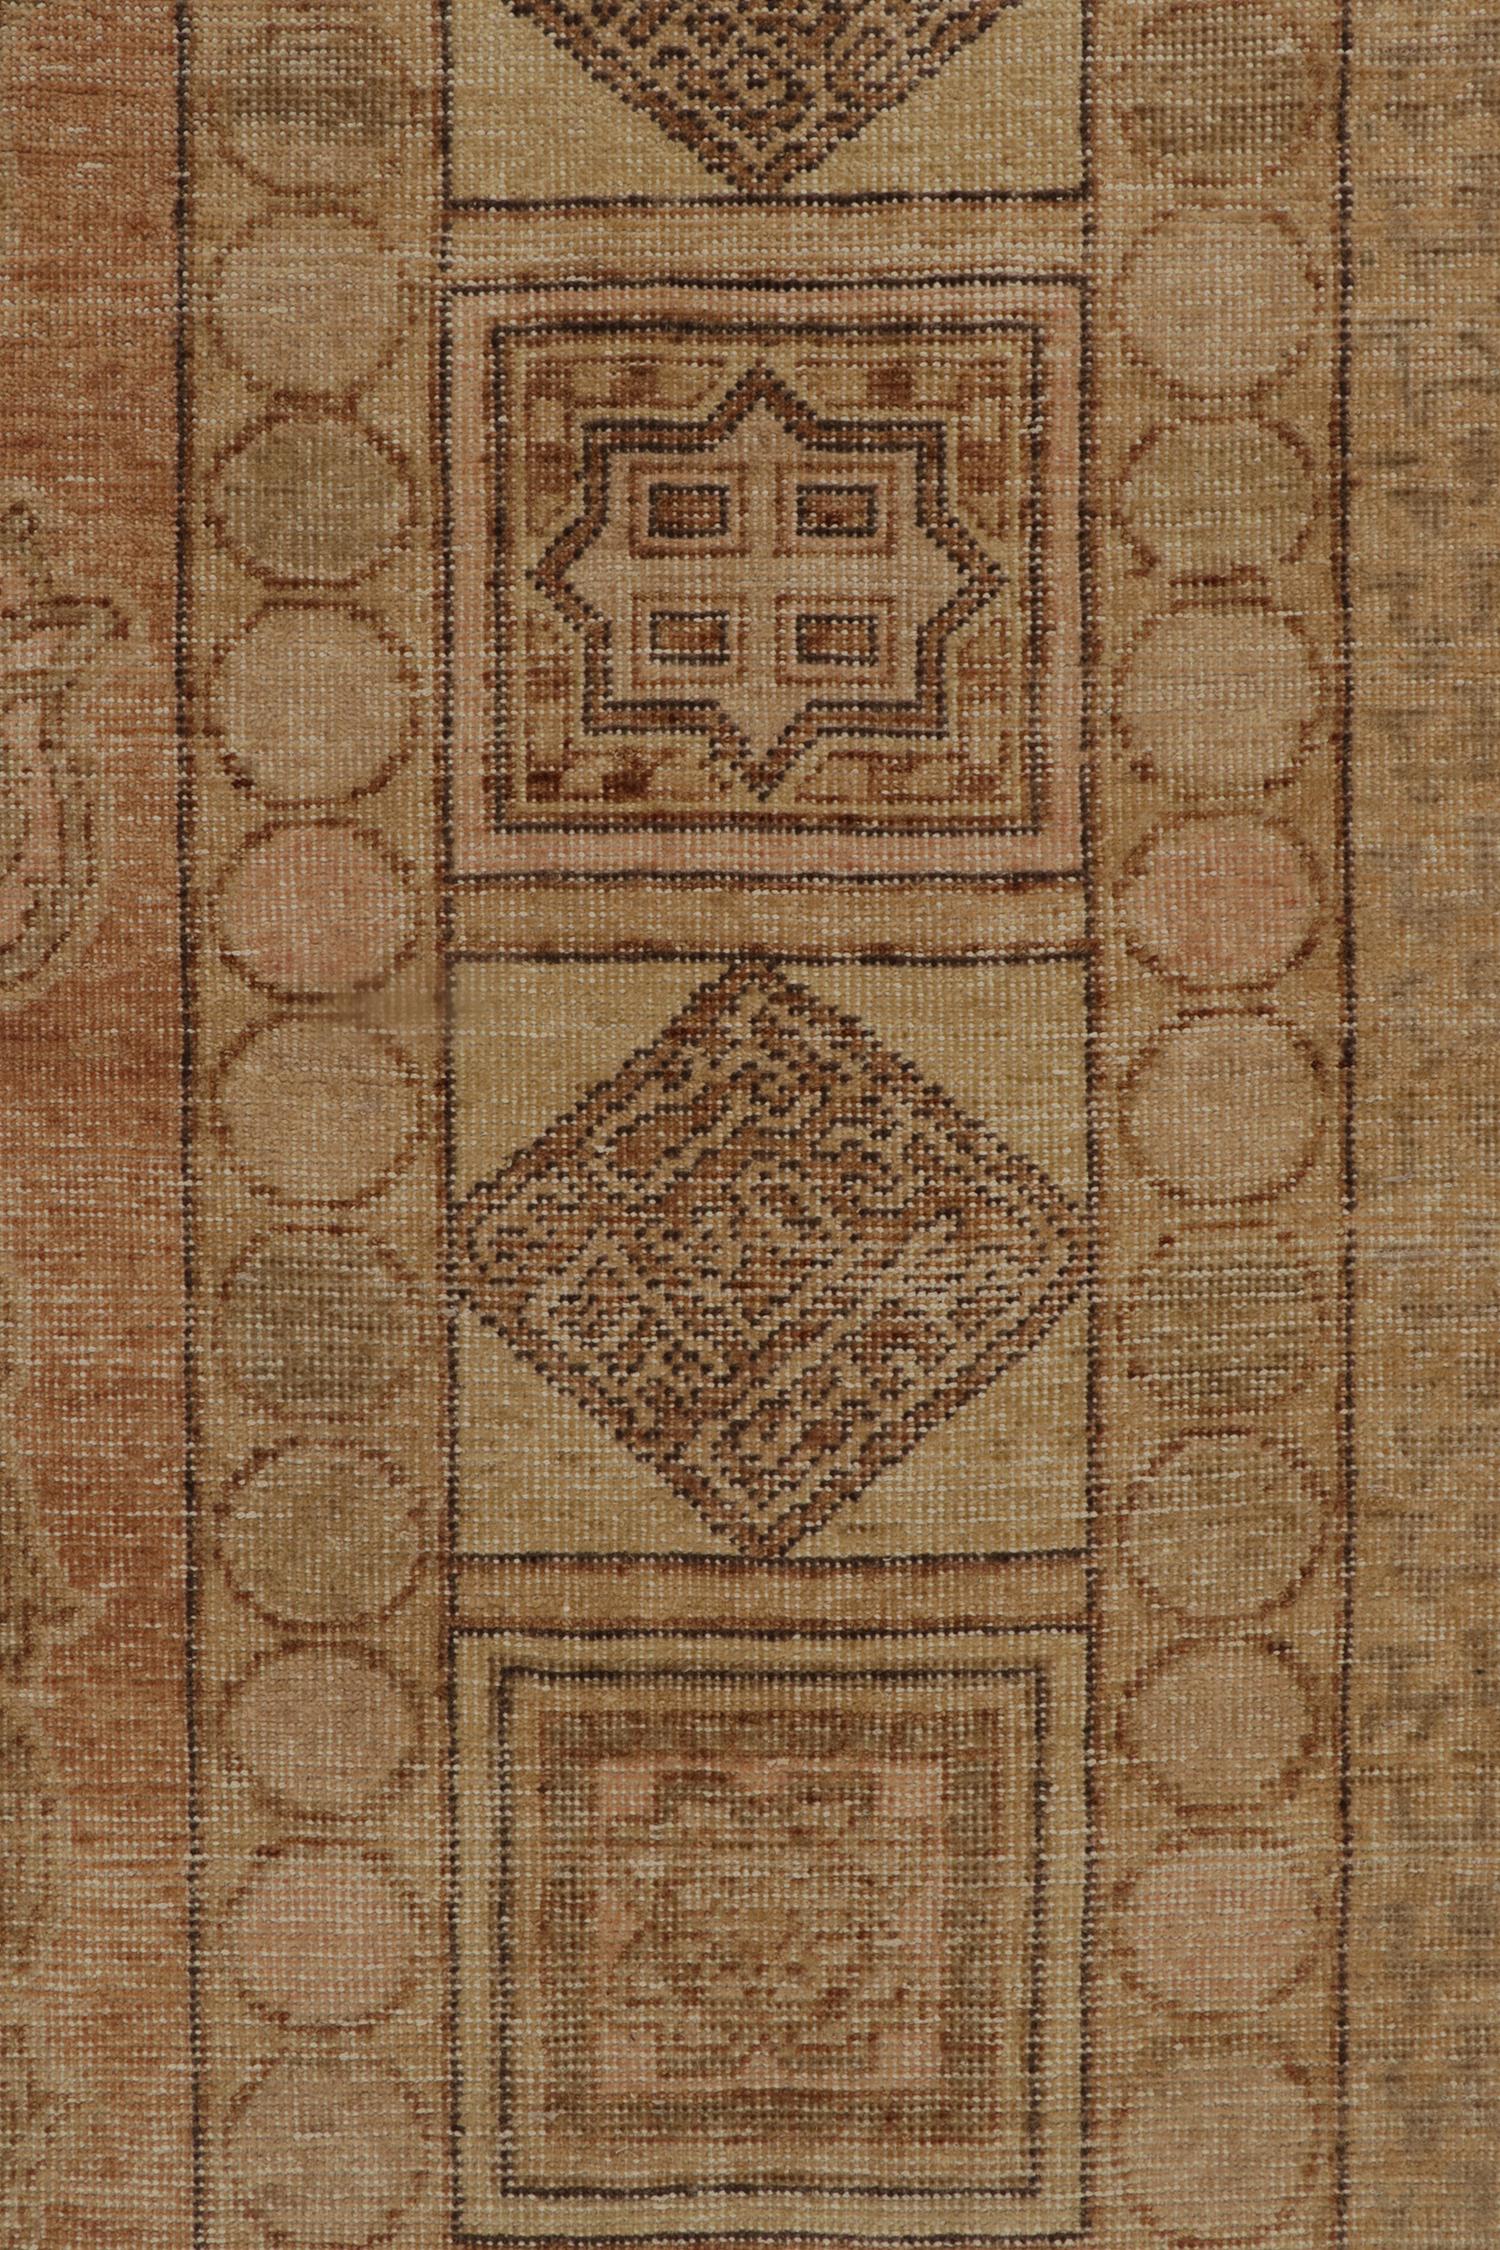 Hand-Knotted Rug & Kilim’s Distressed Ottoman Style Rug in Beige-Brown, Green, Orange For Sale